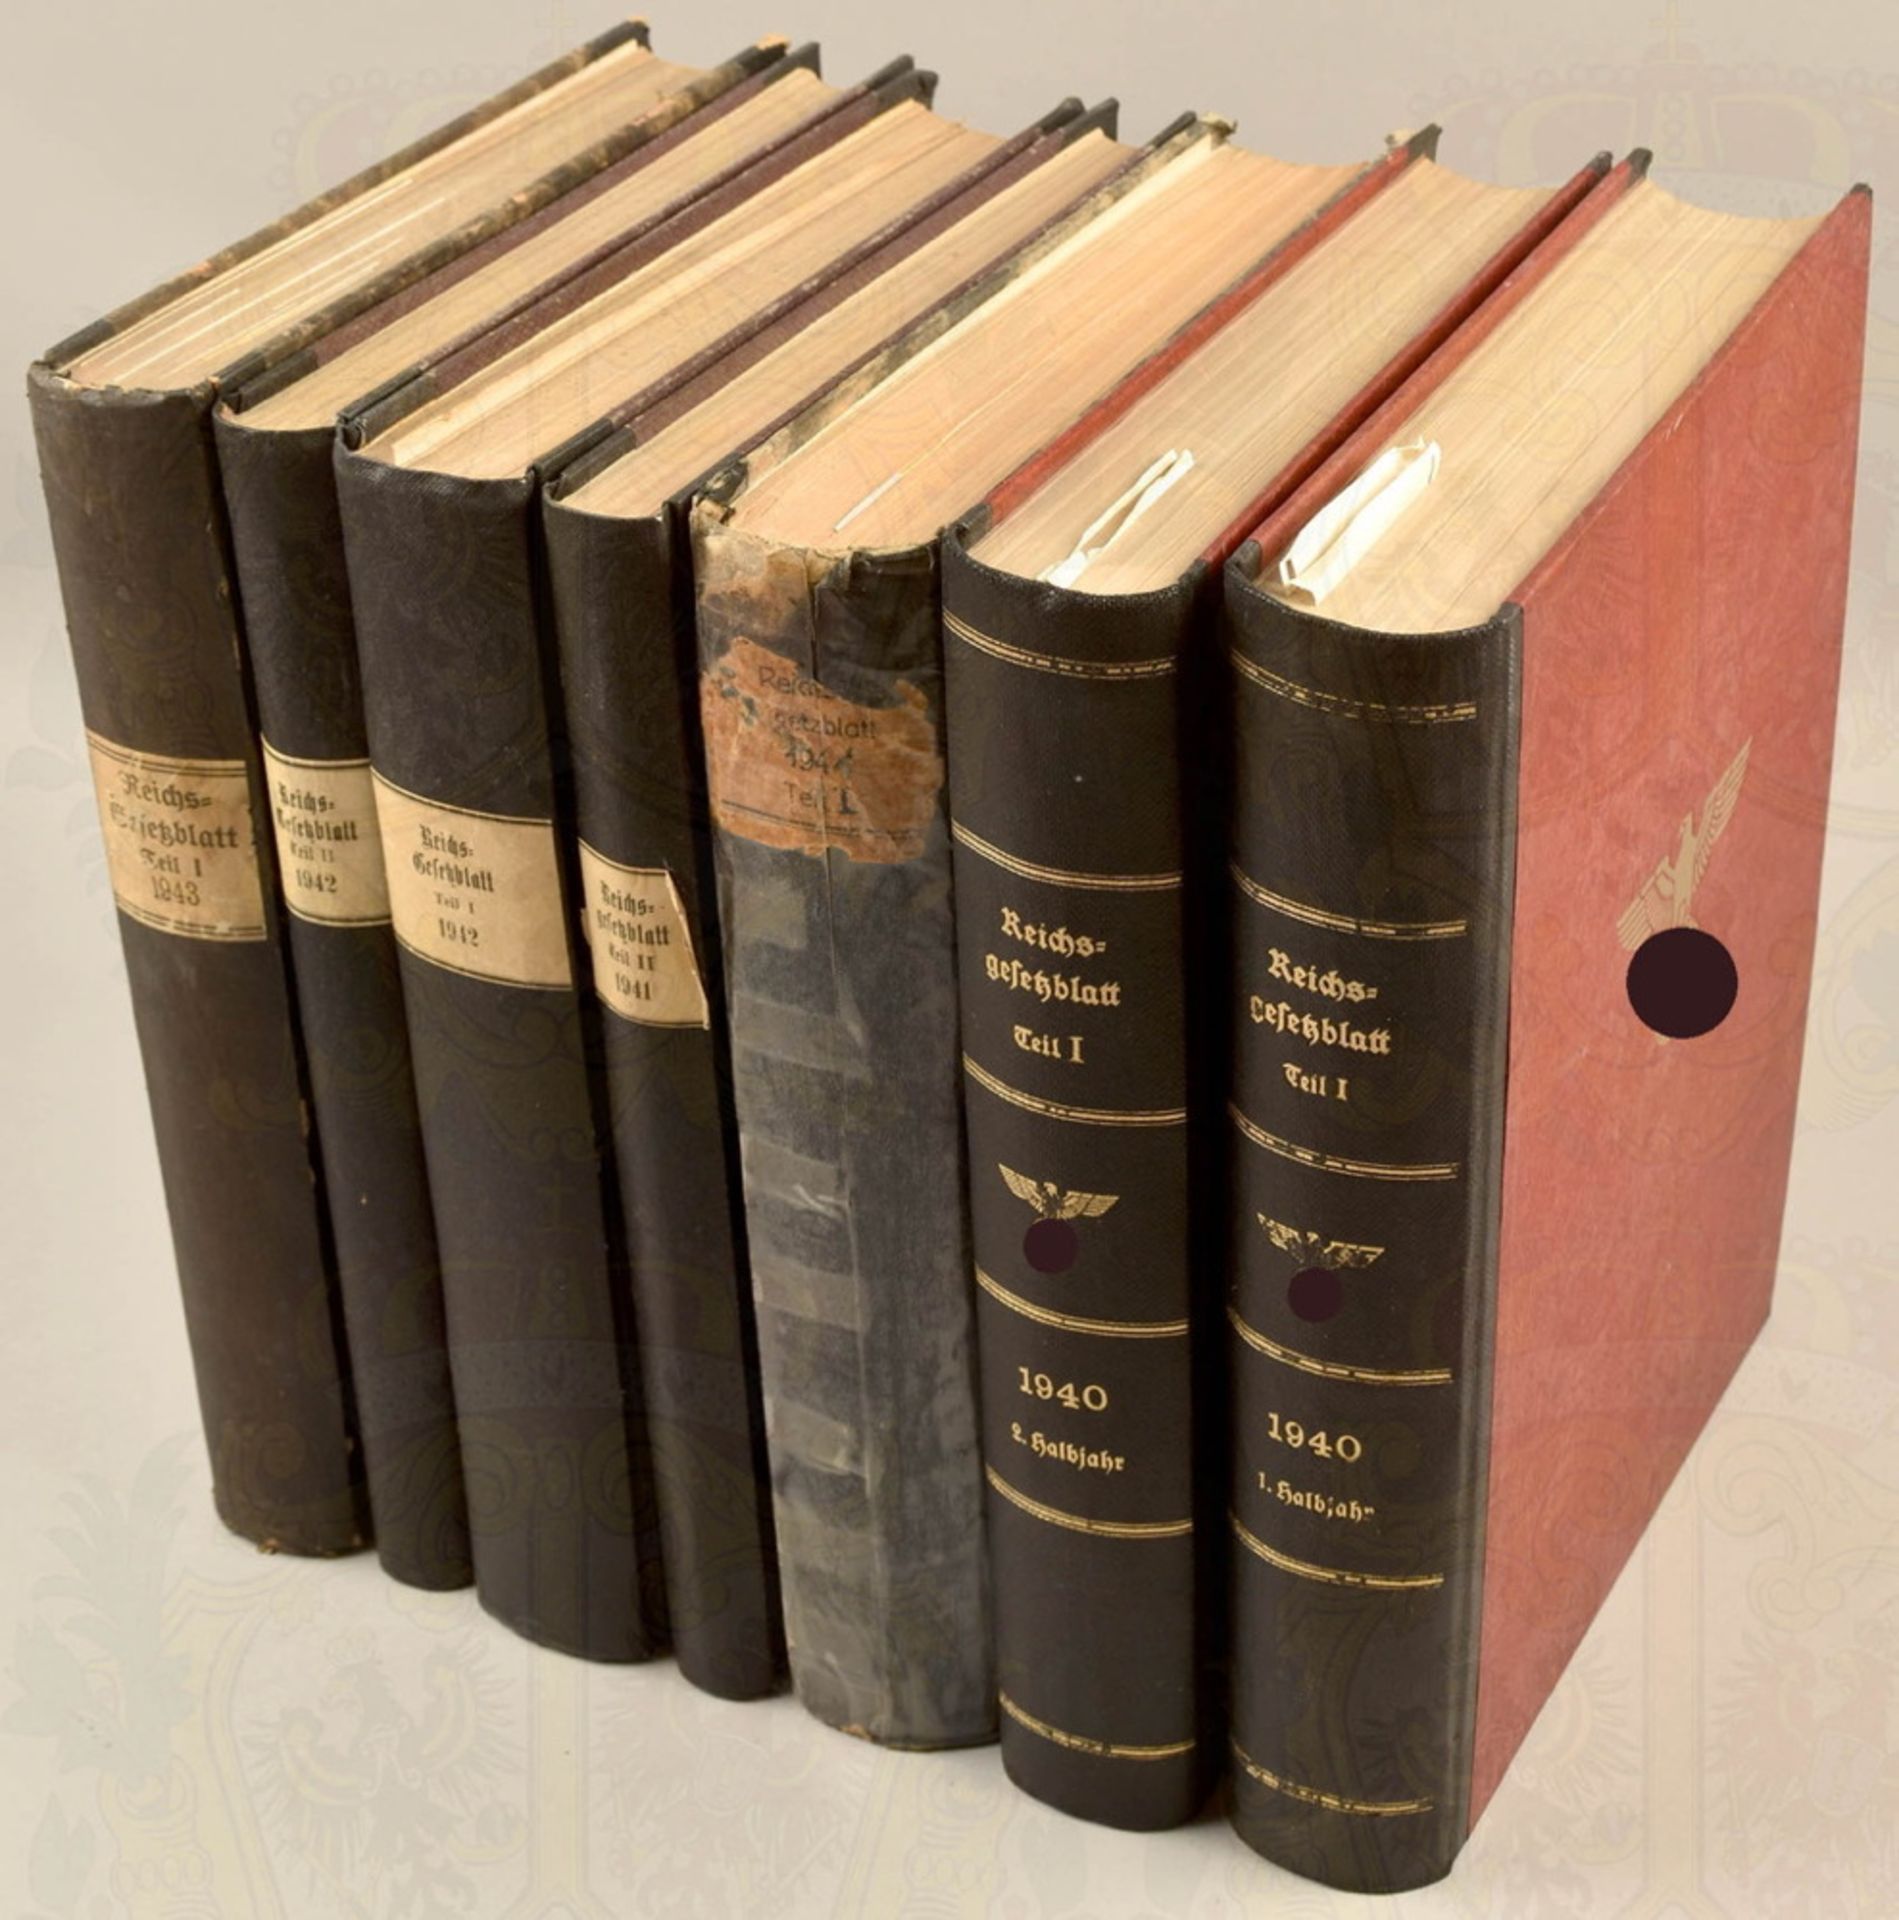 7 volumes legal texts of the Third Reich 1940-1943